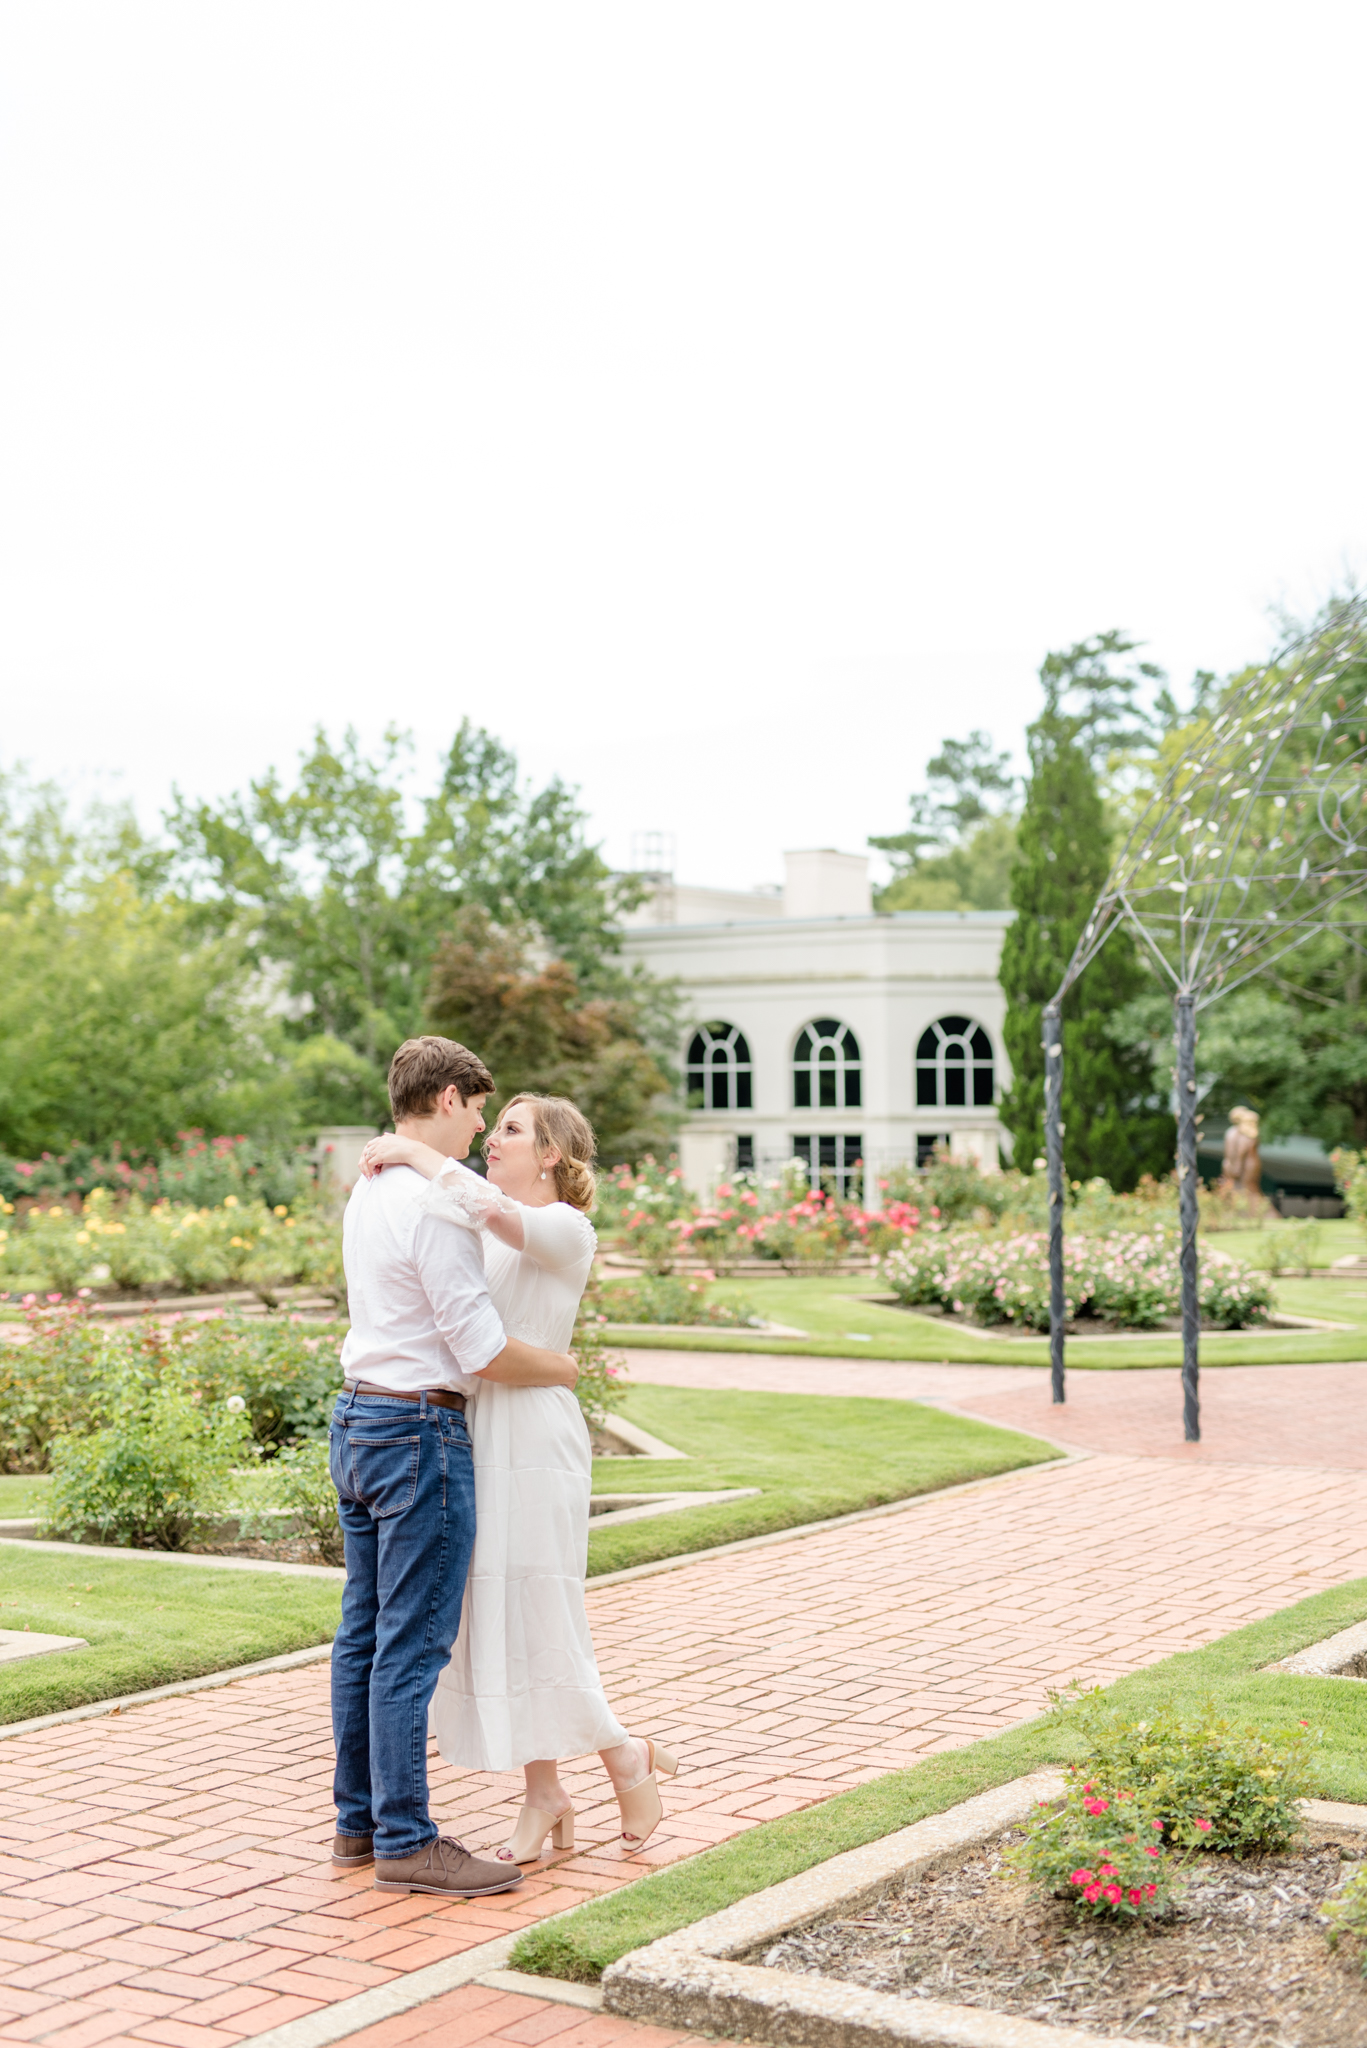 Engaged couple cuddles in rose garden.